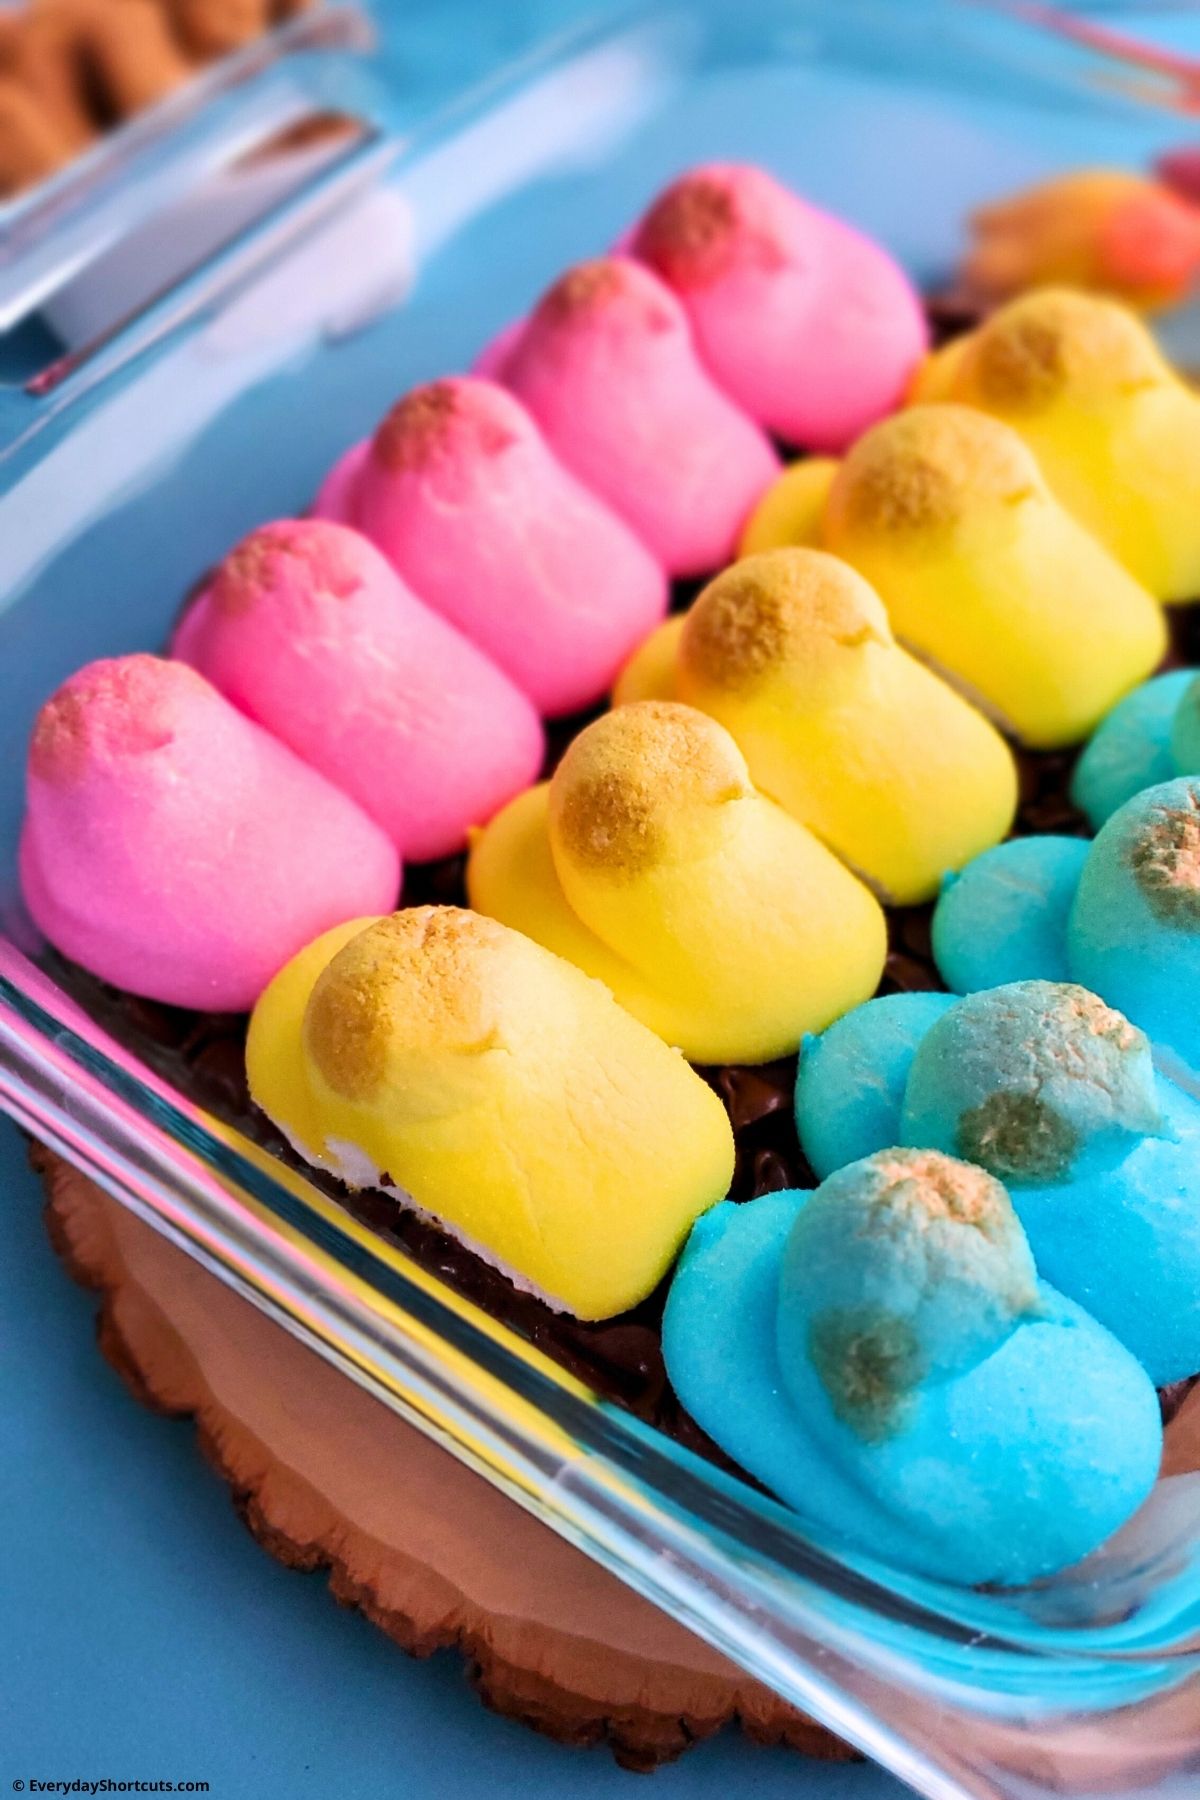 Marshmallow peeps and chocolate dip